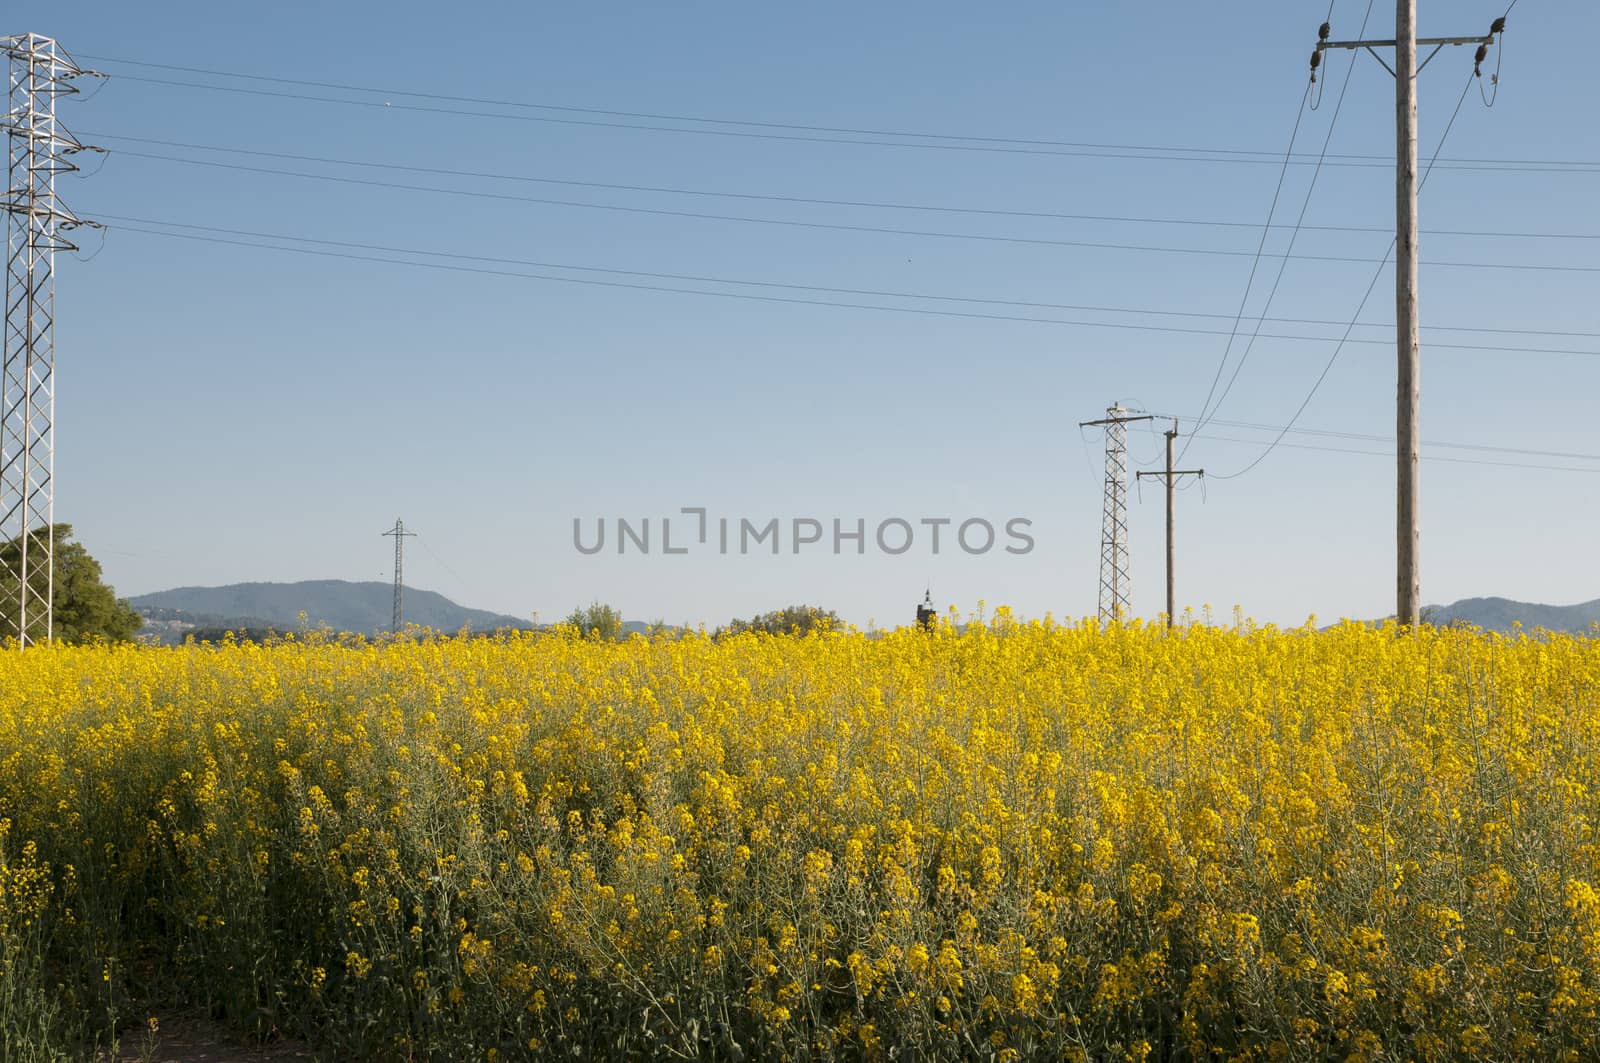 field of yellow flowers and long